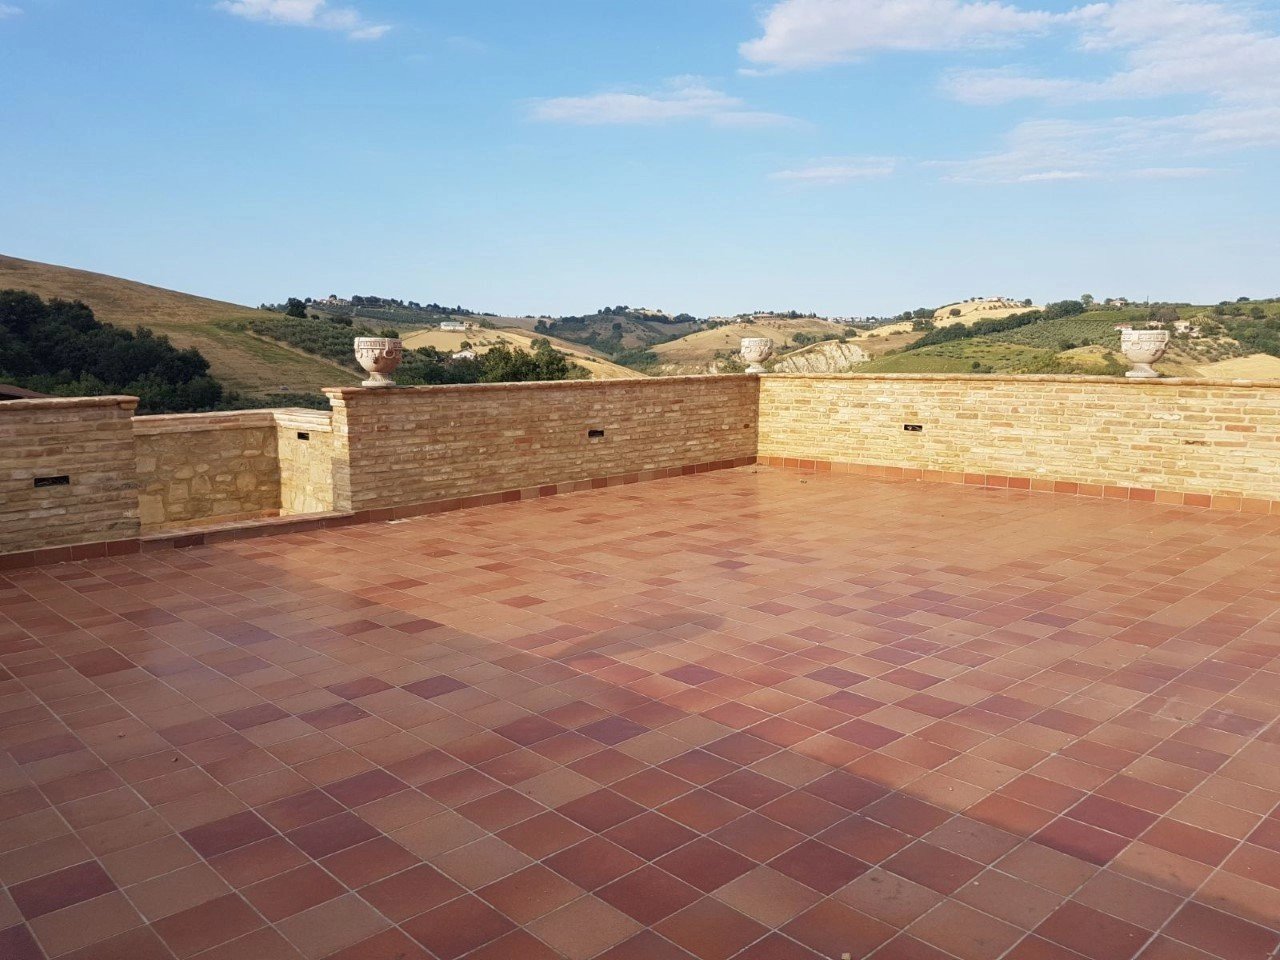 Countryhouse with roof terrace, vineyard and olive grove